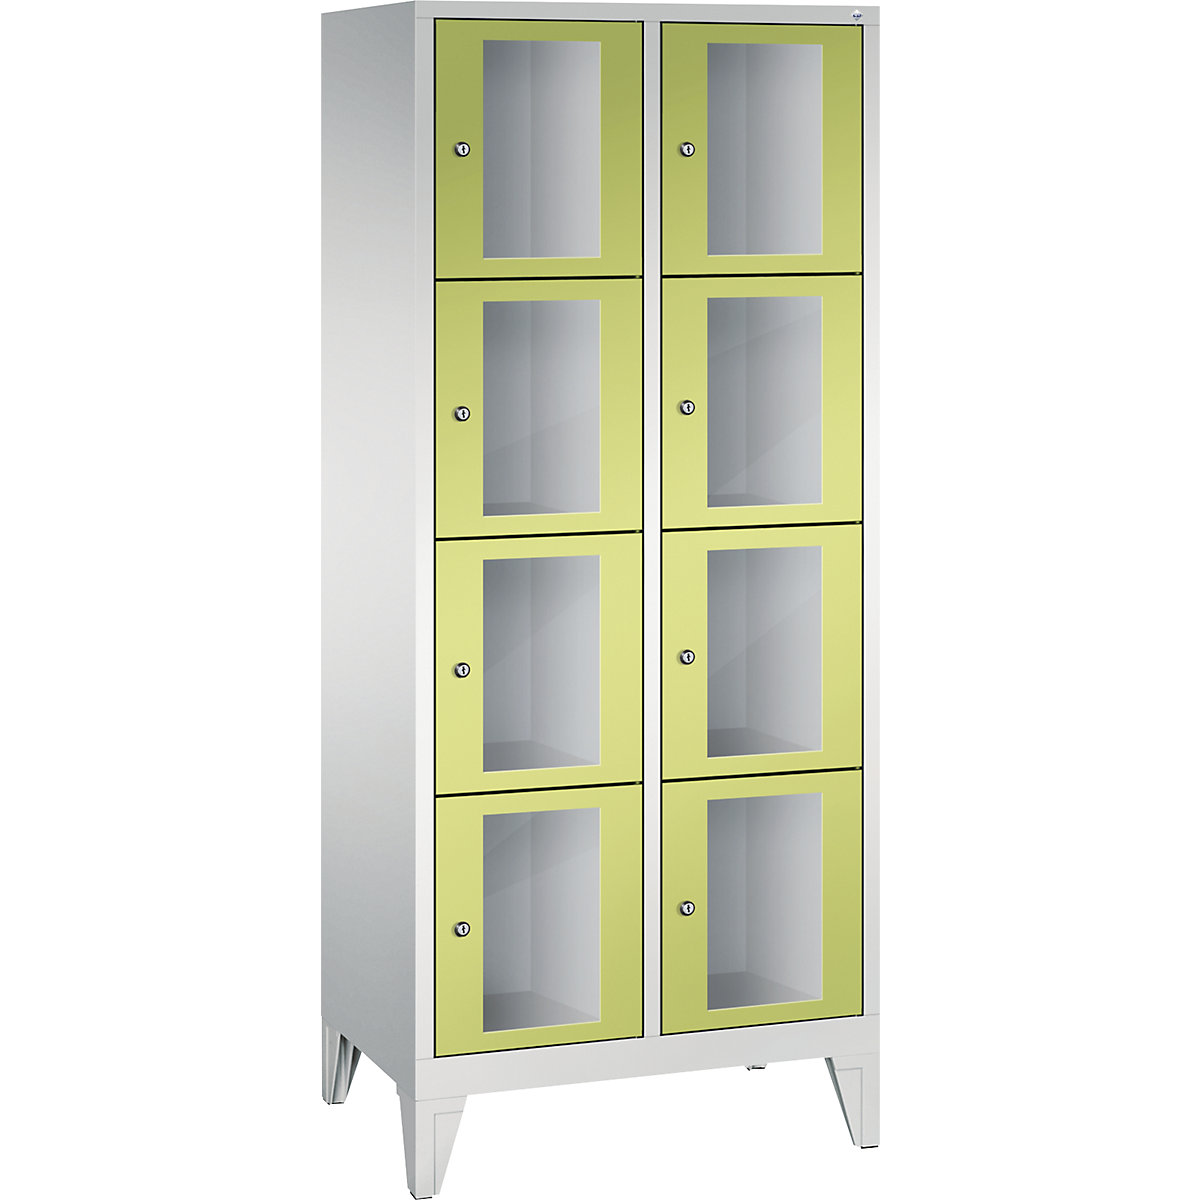 CLASSIC locker unit, compartment height 375 mm, with feet – C+P, 8 compartments, width 810 mm, viridian green door-6